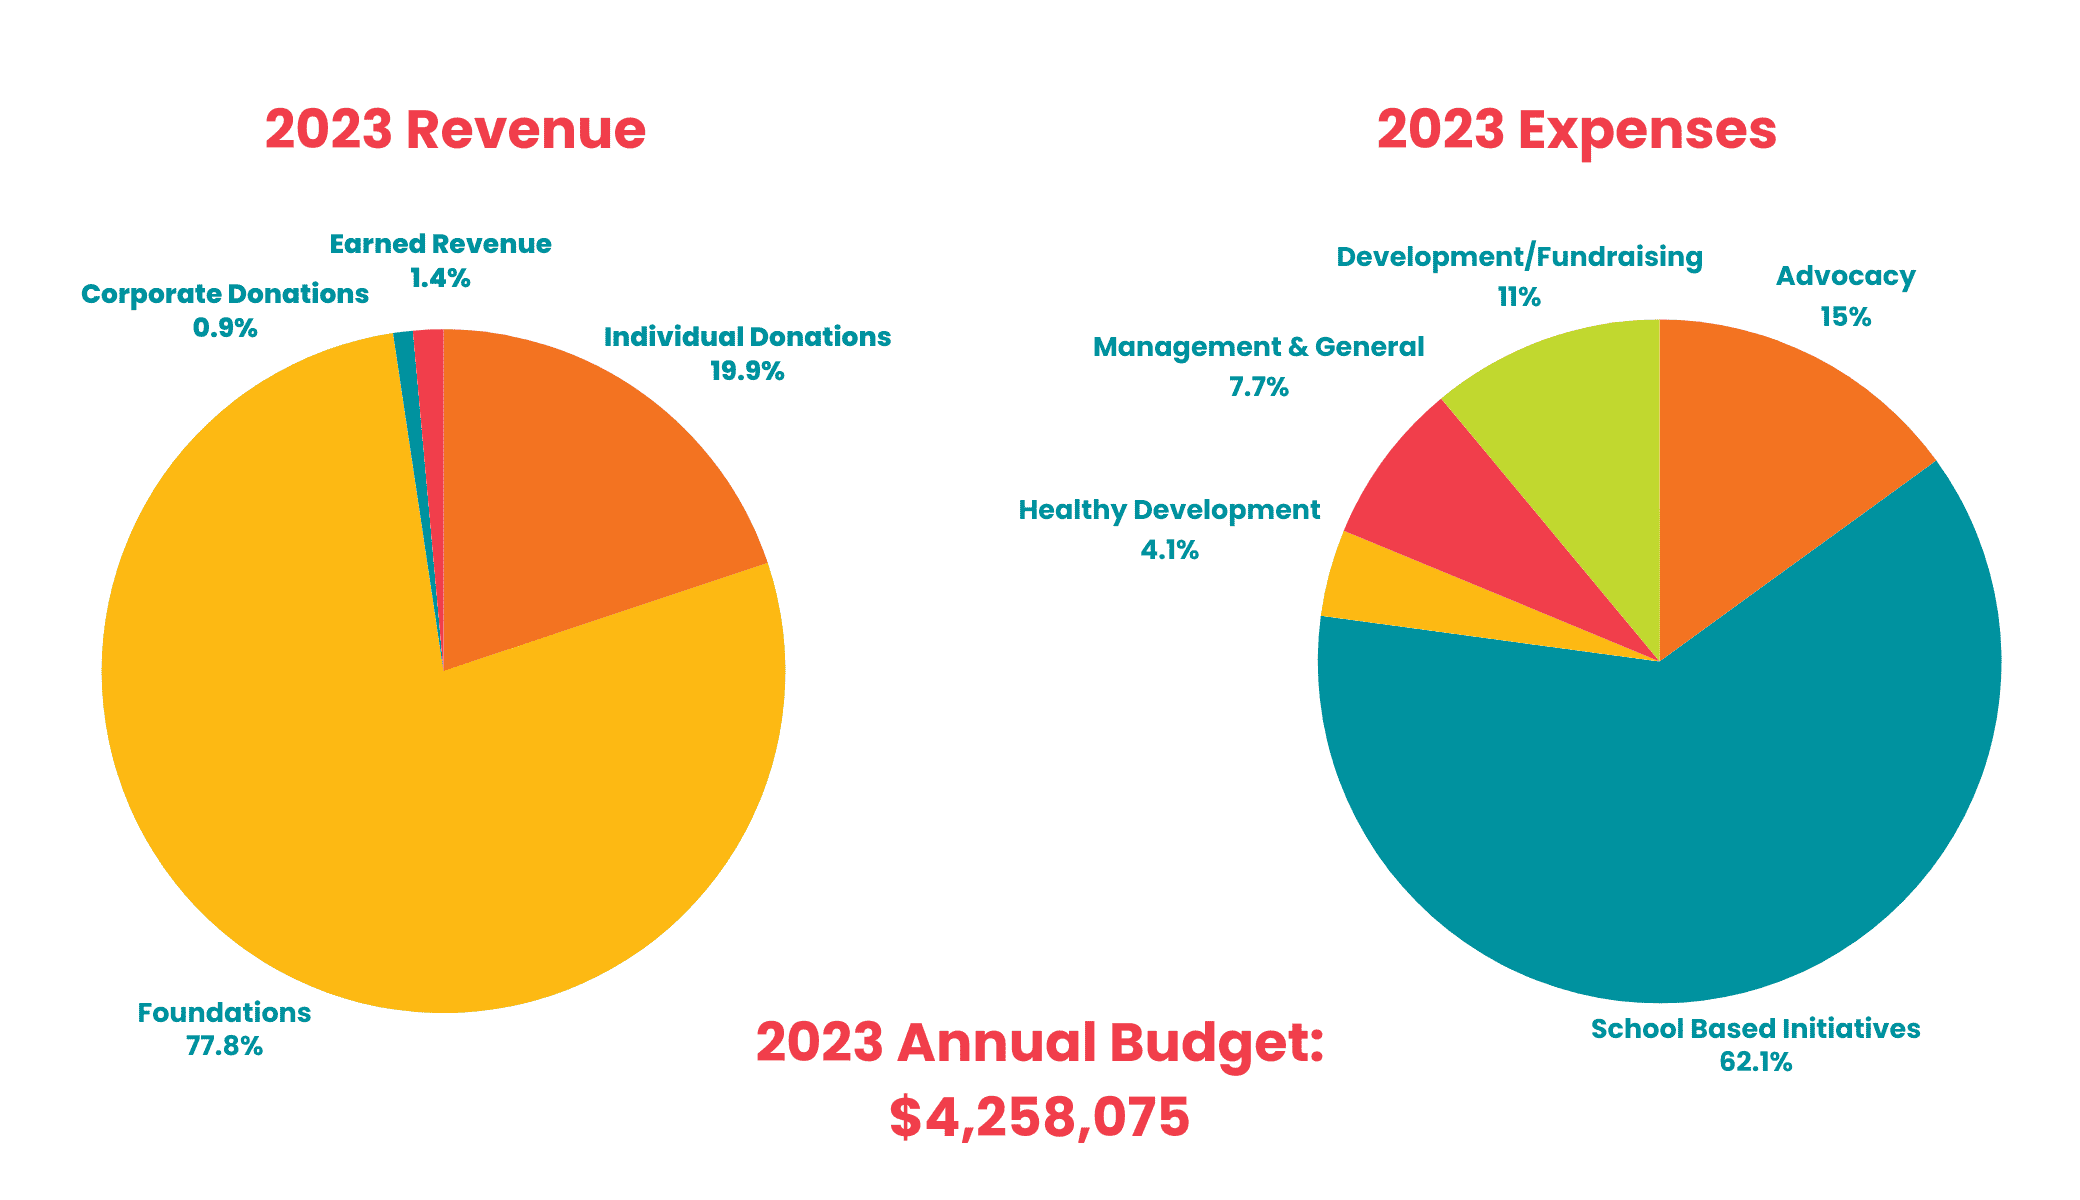 This image presents two pie charts of expenses and revenue from 2023.